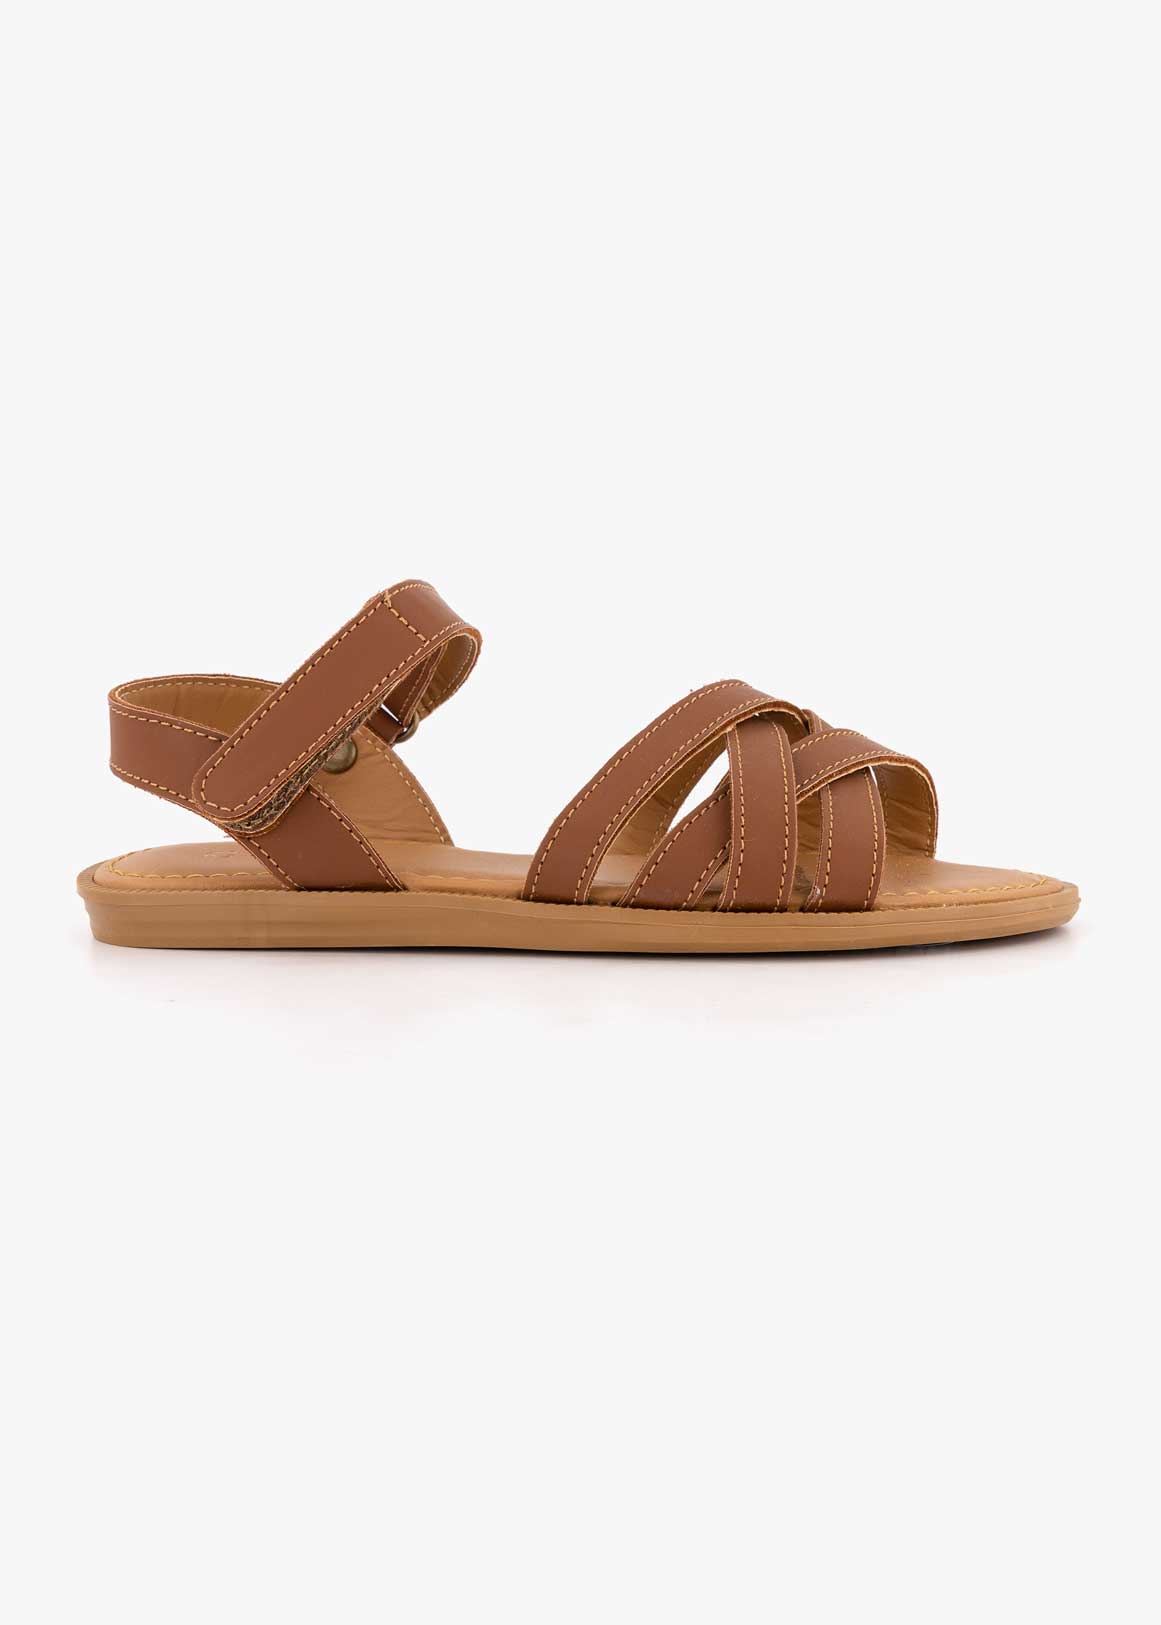 OG X STRAPPY SANDAL - Woolworths Mauritius Online